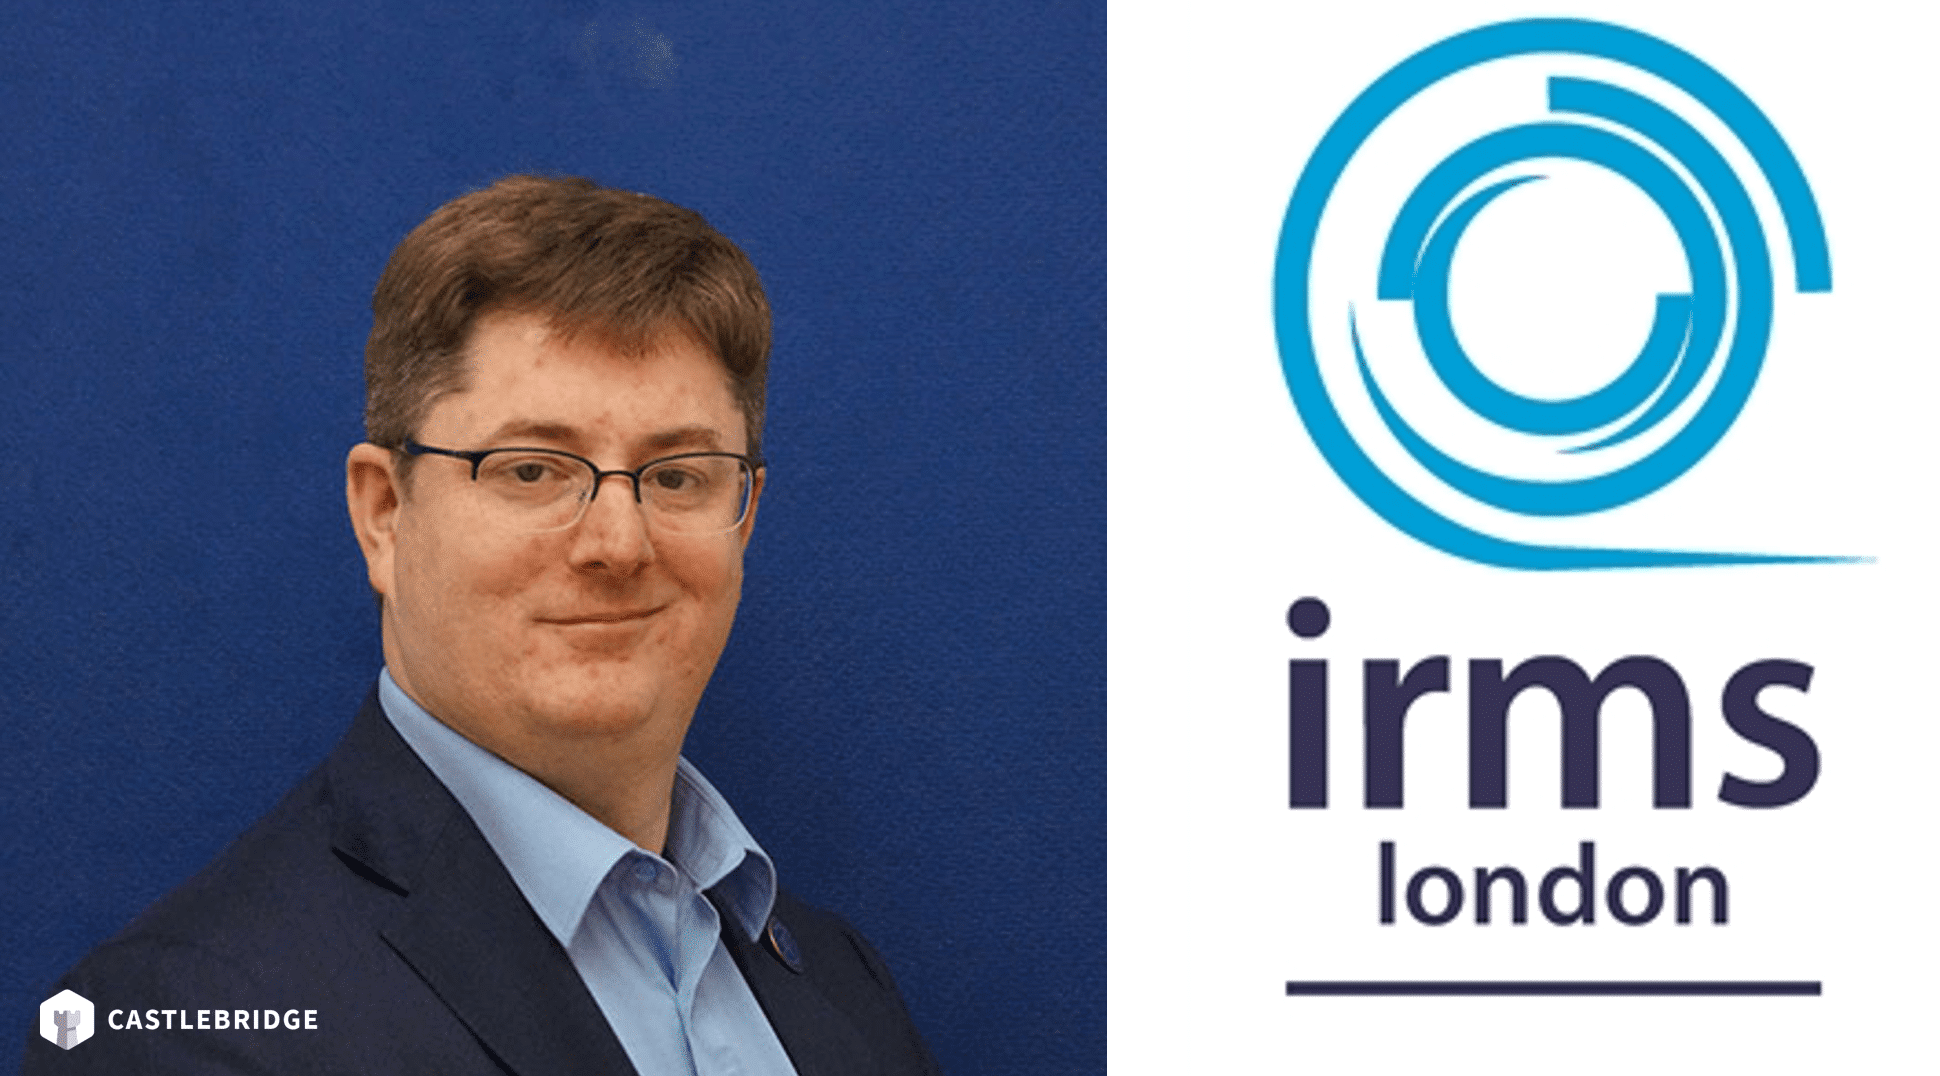 IRMS LONDON: DATA ETHICS - IT'S LEGAL BUT IS IT ETHICAL?